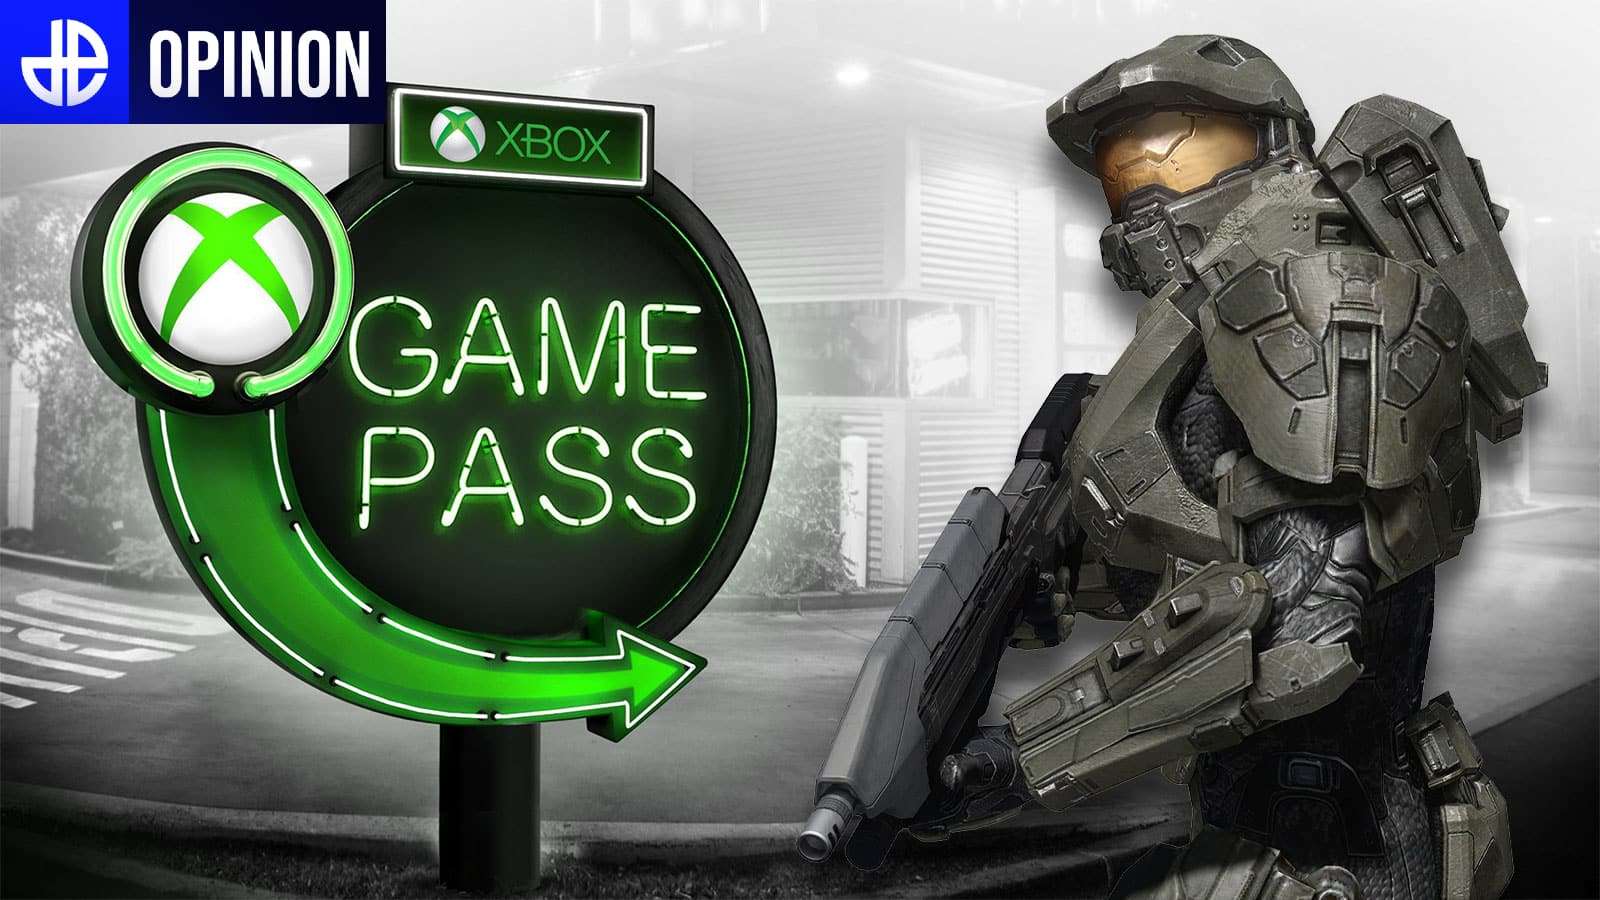 Xbox game pass and Master Chief